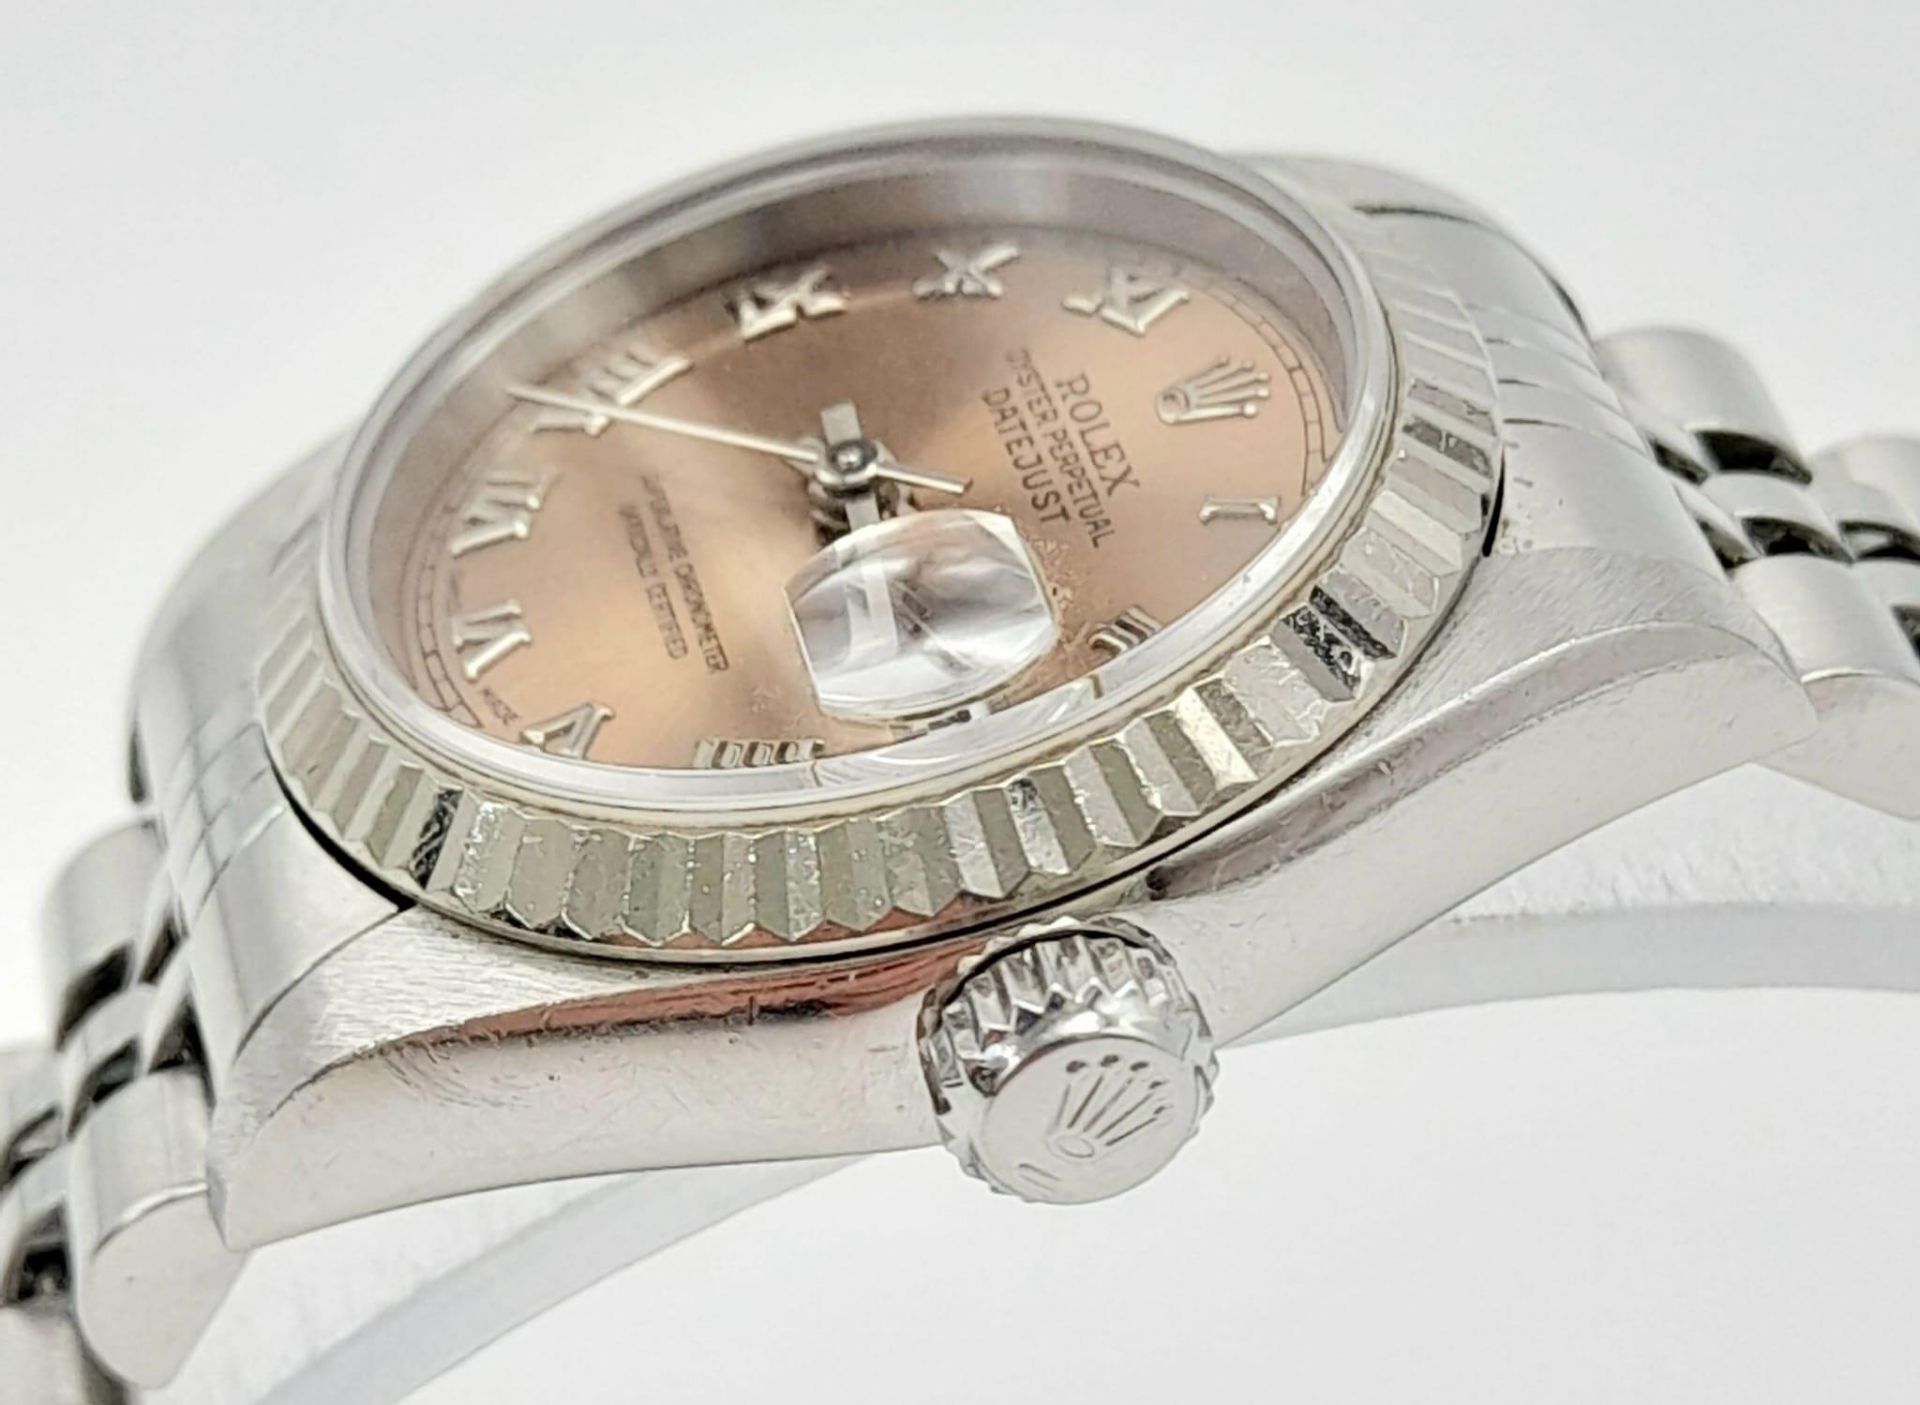 A Rolex Perpetual Datejust Ladies Watch. Stainless steel strap and case - 26mm. Rose gold tone dial. - Image 4 of 13